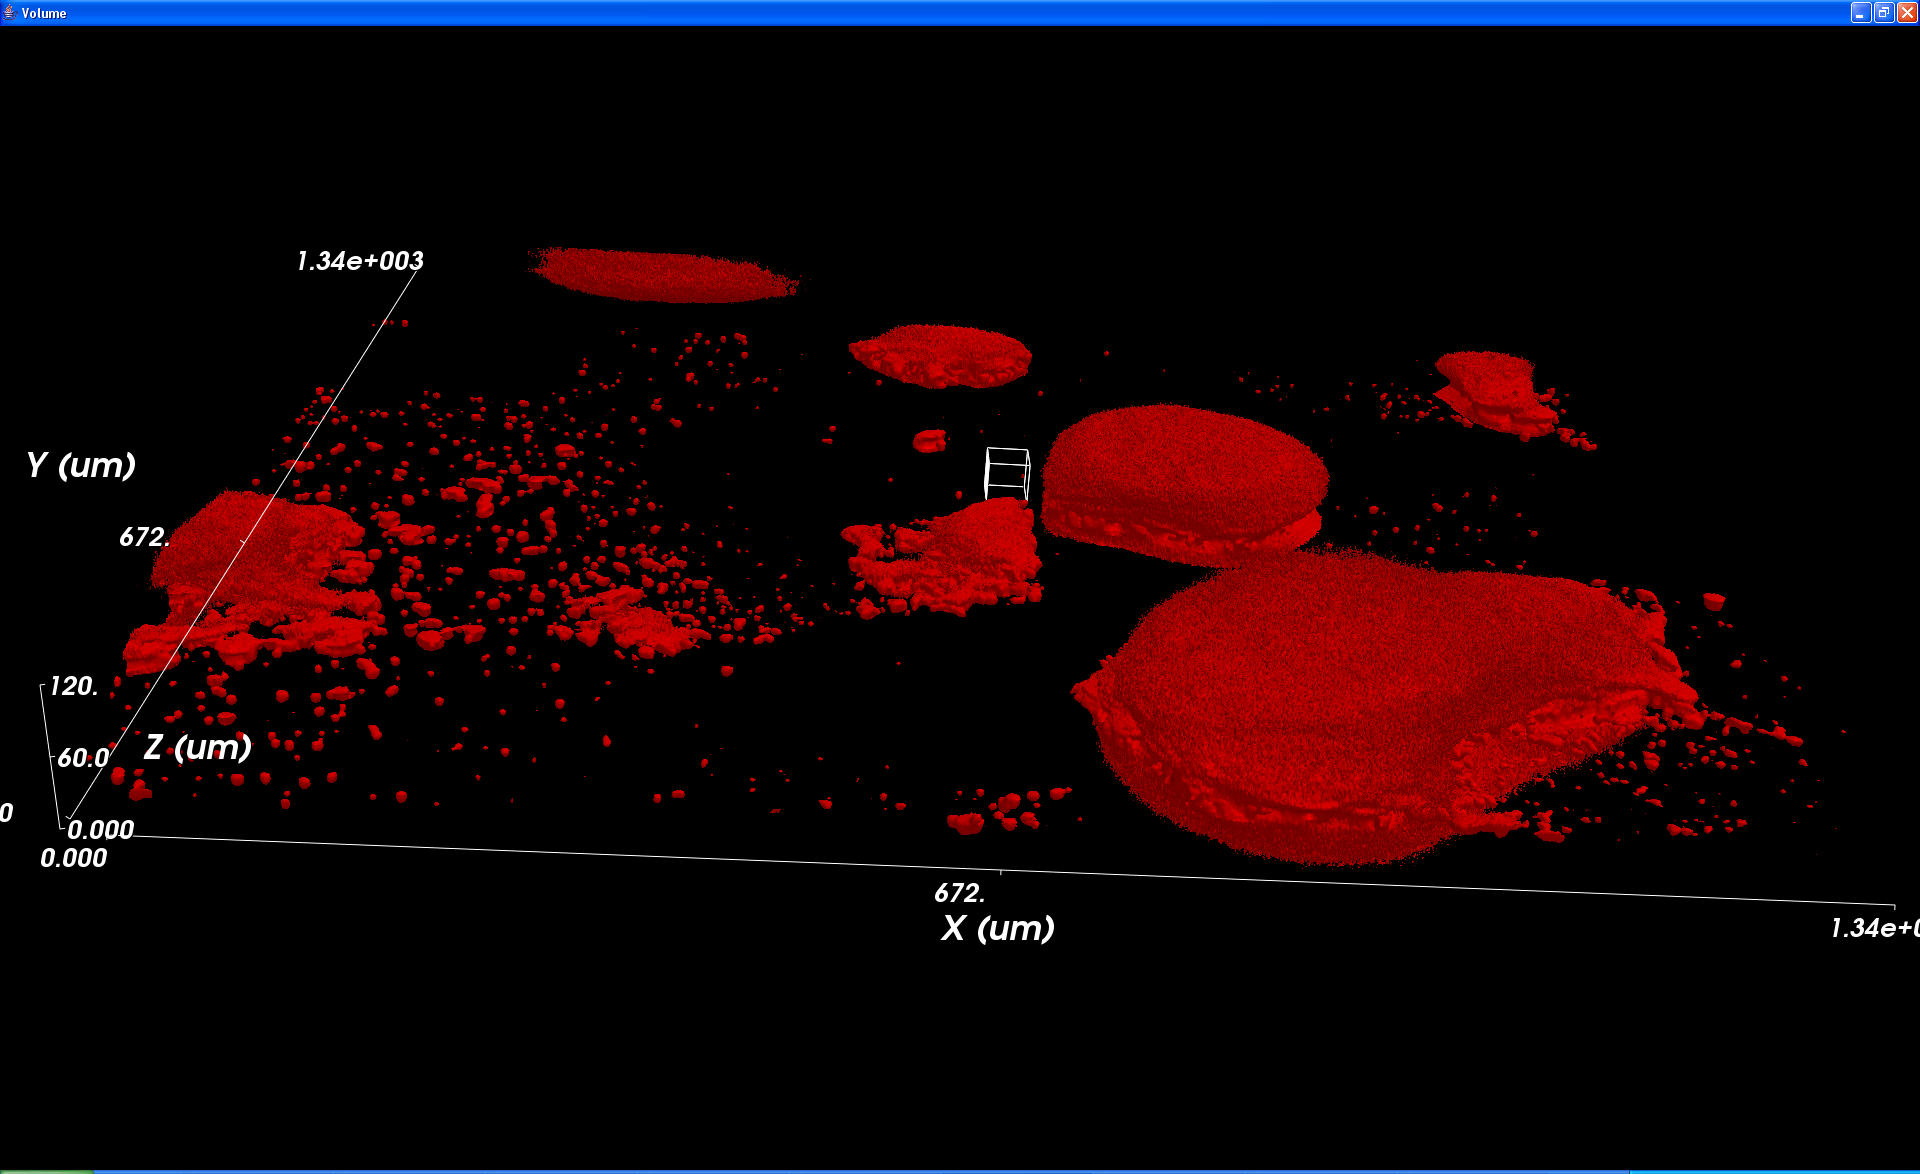 ImageSurfer 3D view of epithelial cells